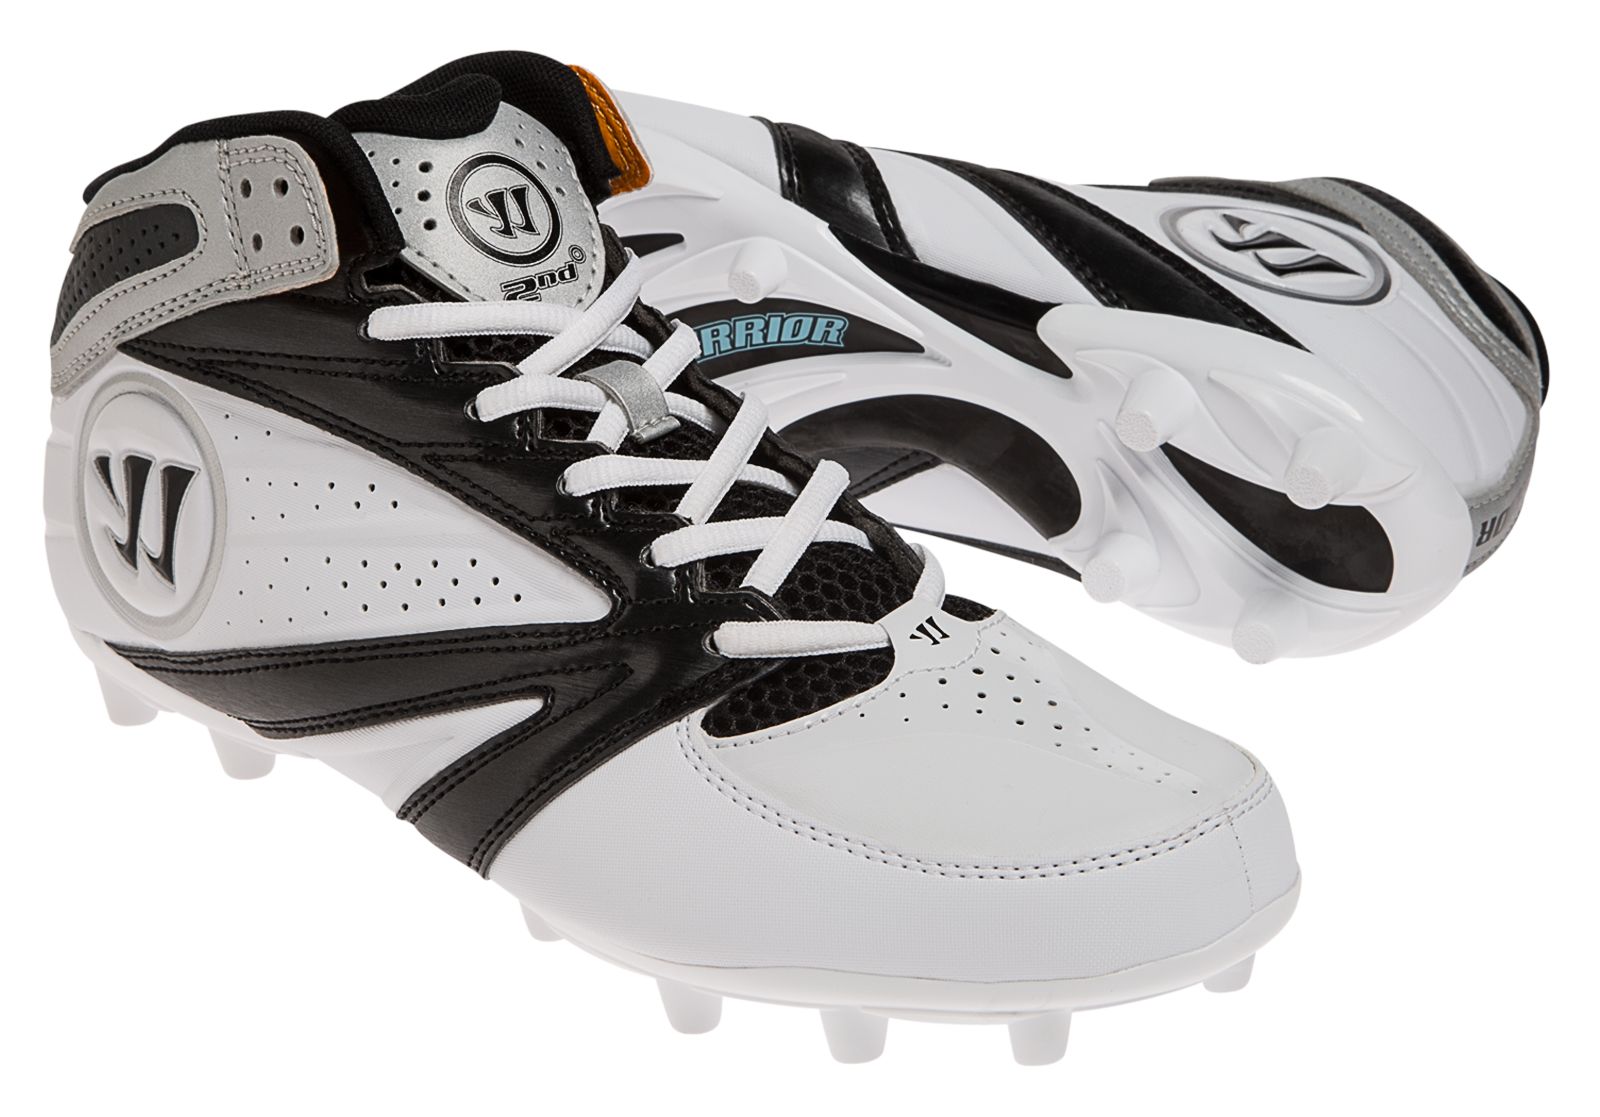 Second Degree 3.0 Cleat, Black image number 3